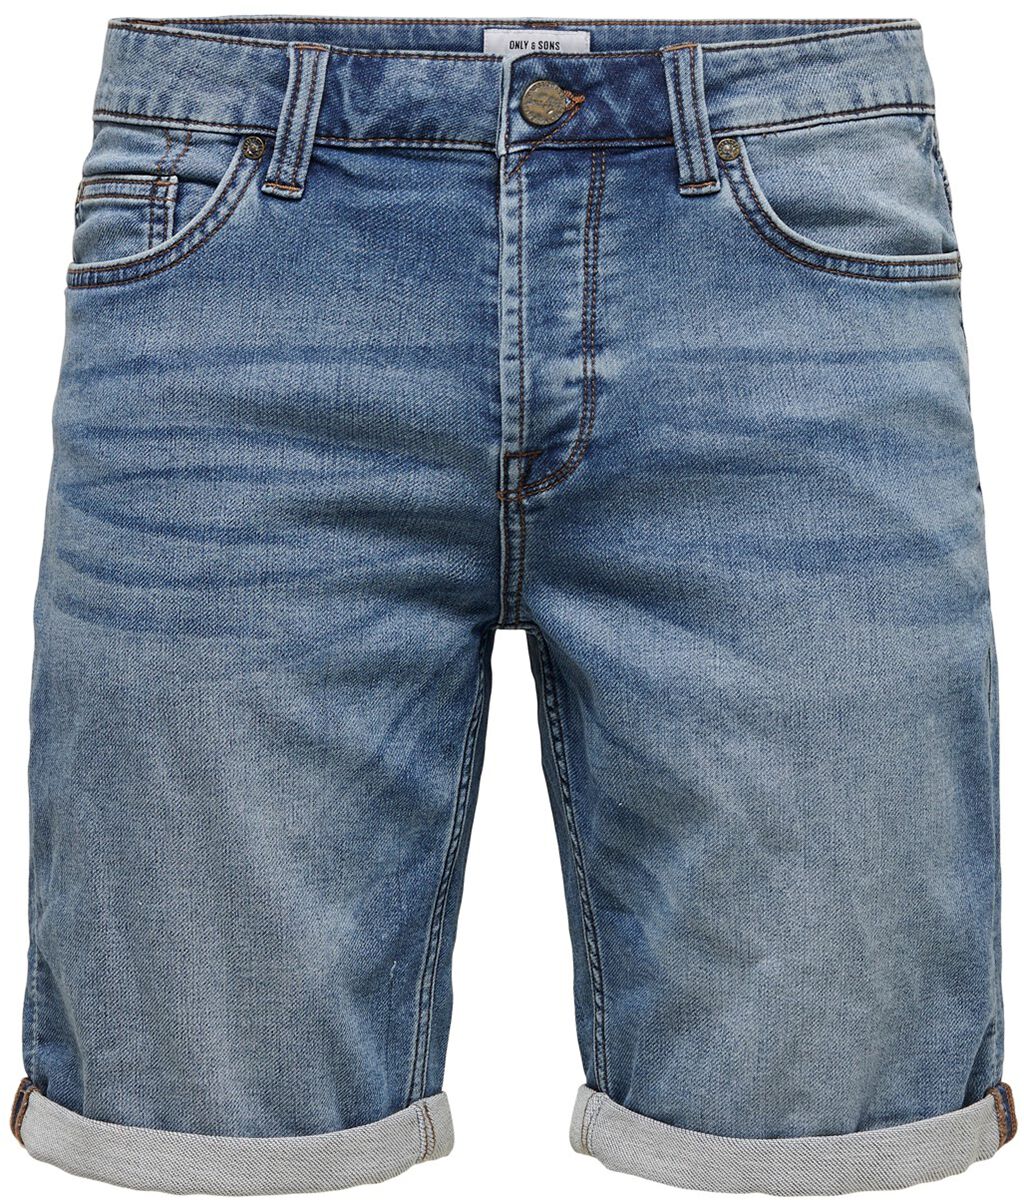 Image of Shorts di ONLY and SONS - Ply Life Blue Shorts - S a L - Uomo - blu